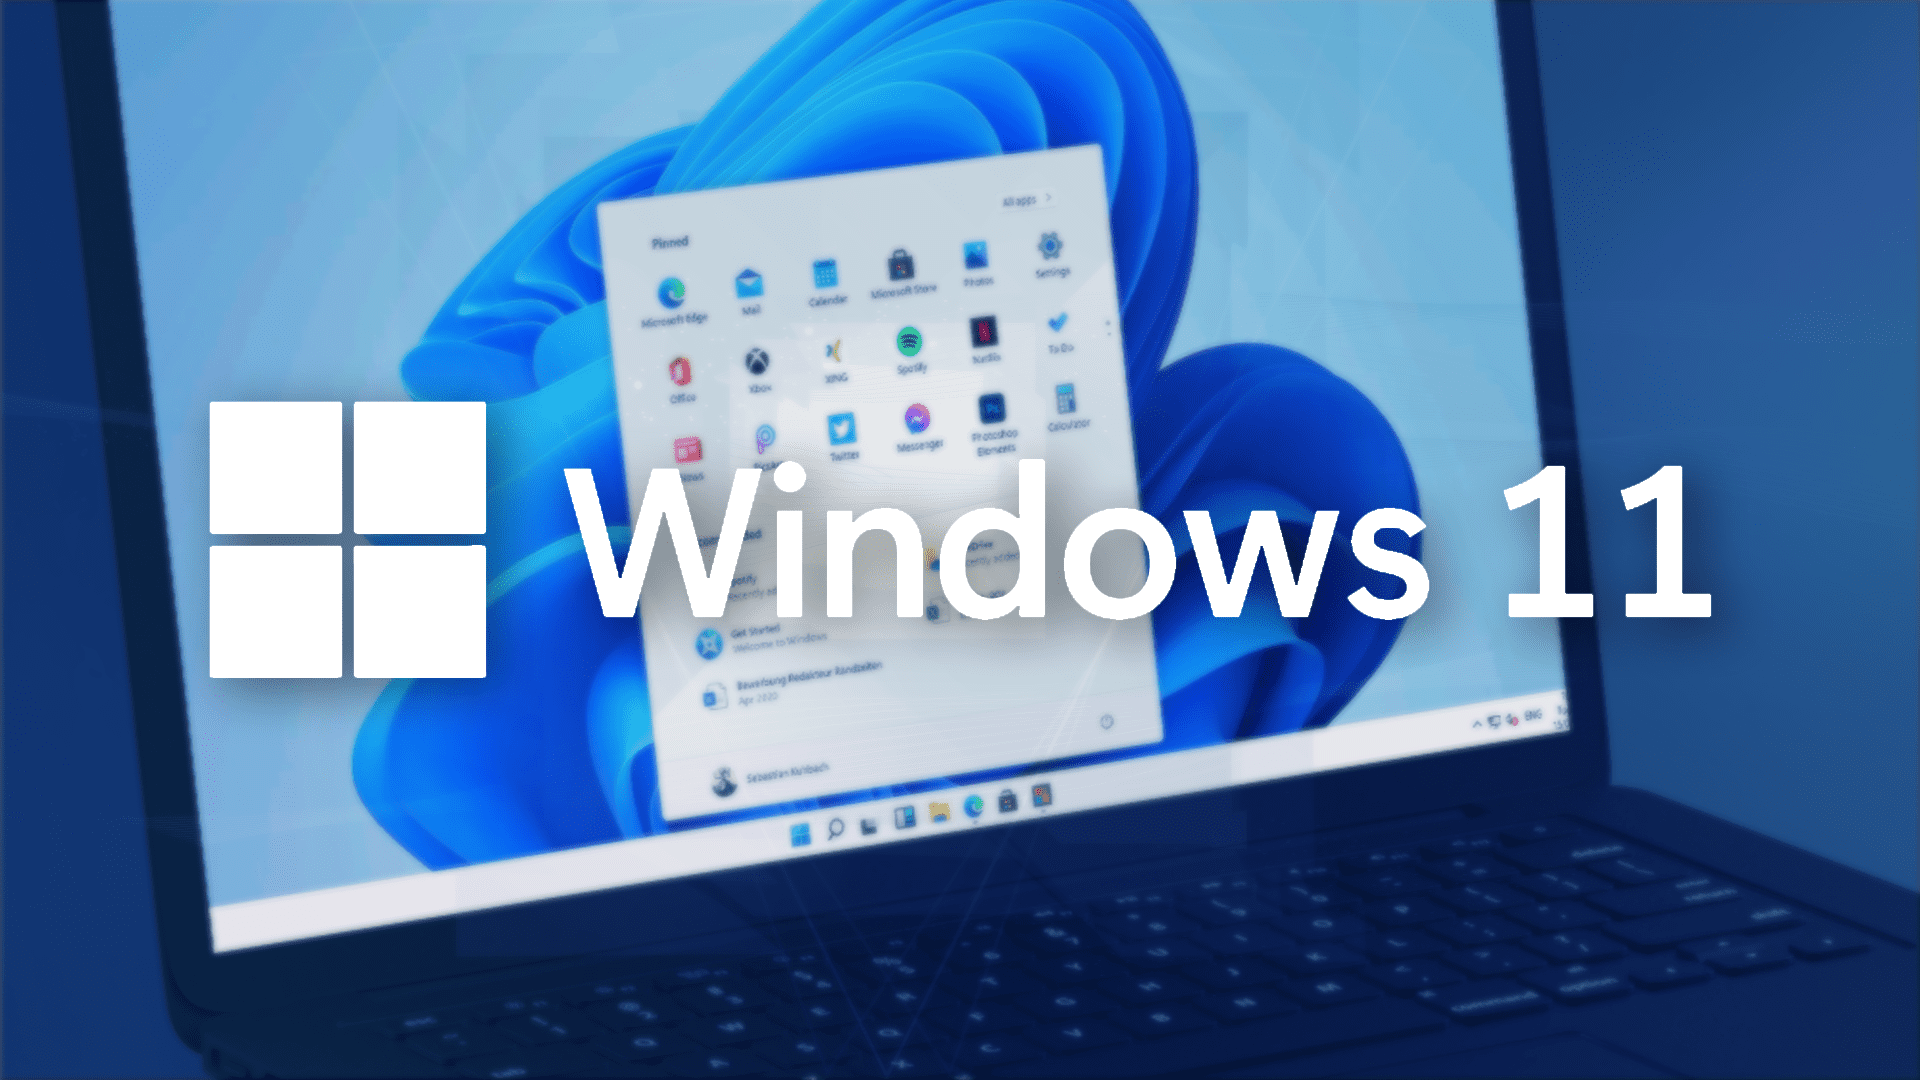 Windows 11: Turn off security to increase gaming performance